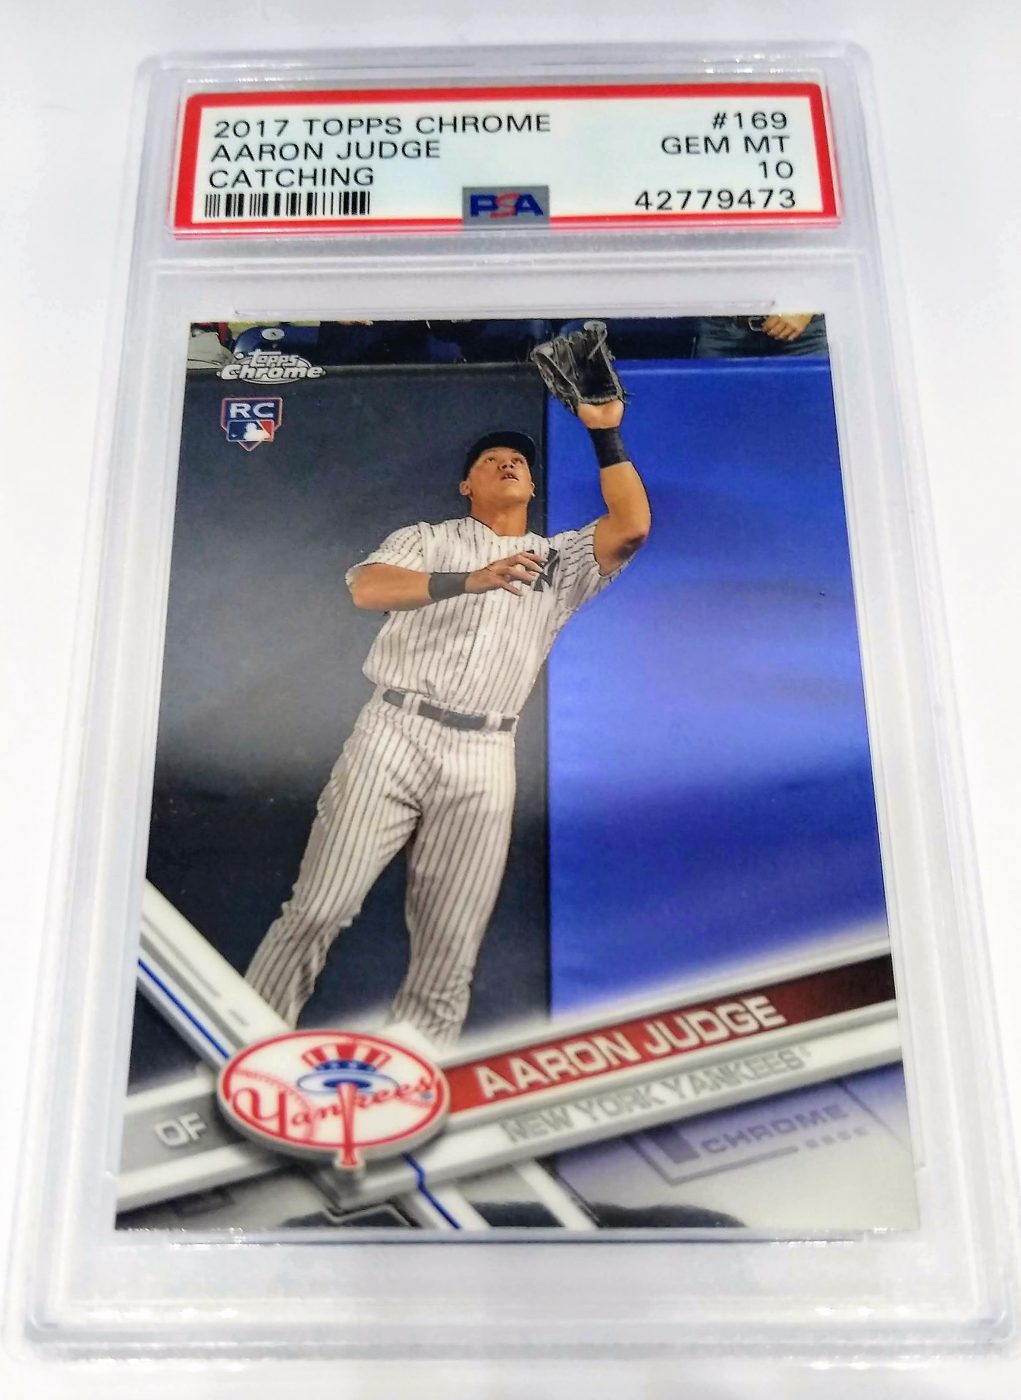 2017 Topps Chrome Aaron Judge Catching PSA 10 Gem Mint Graded Rookie Card simple Xclusive Collectibles   